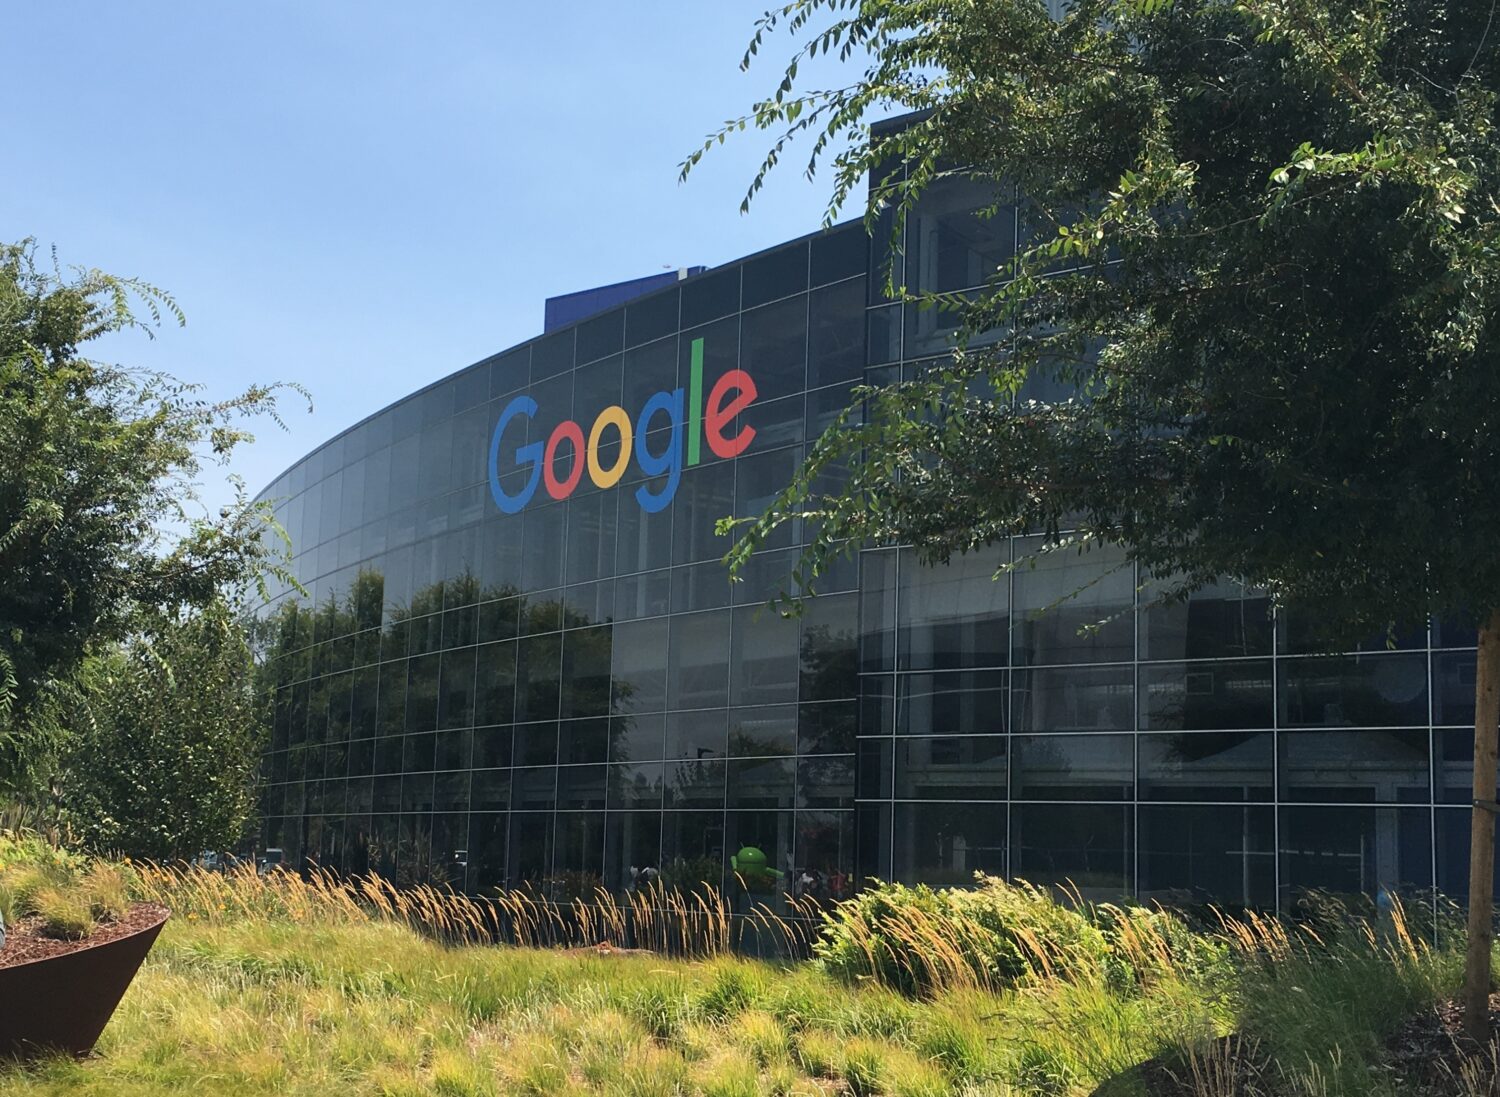 Google illegally underpaid thousands of workers